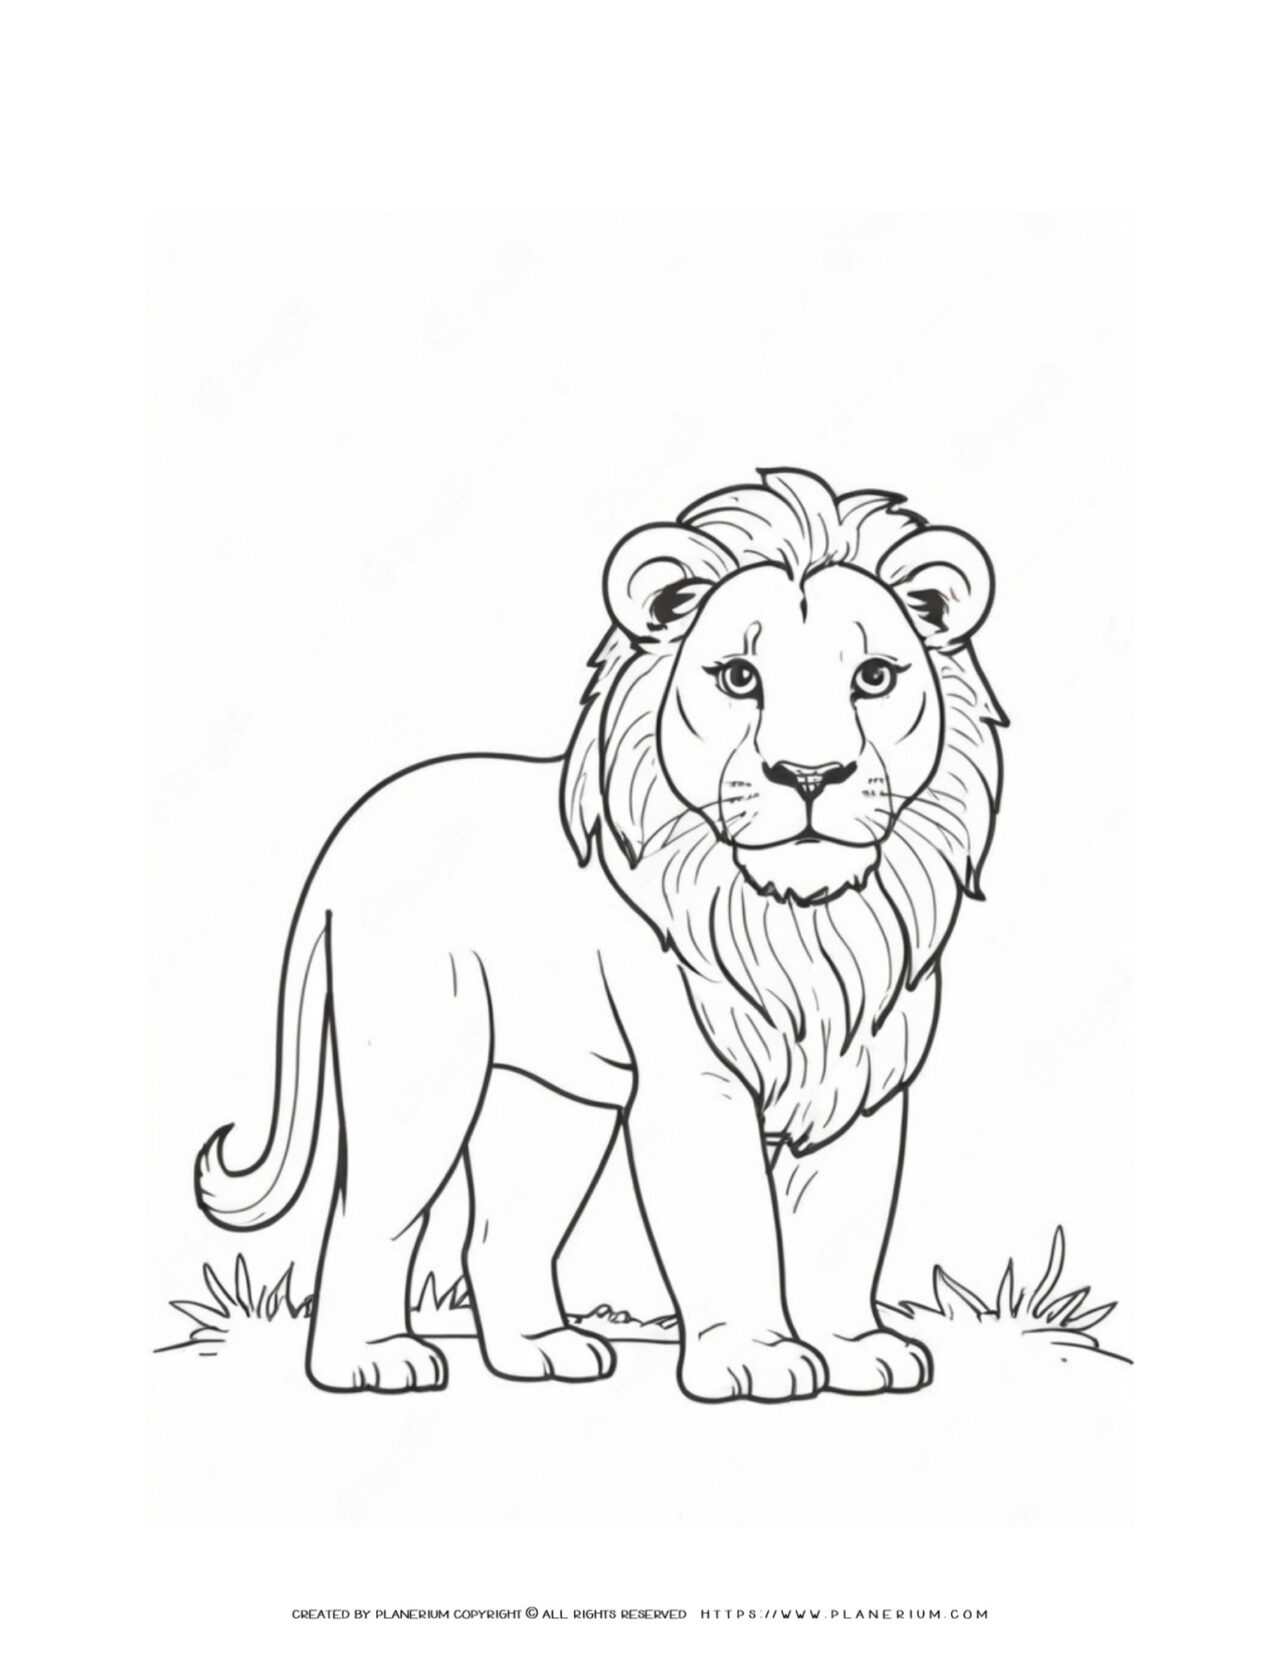 Lion-Outline-Coloring-Page